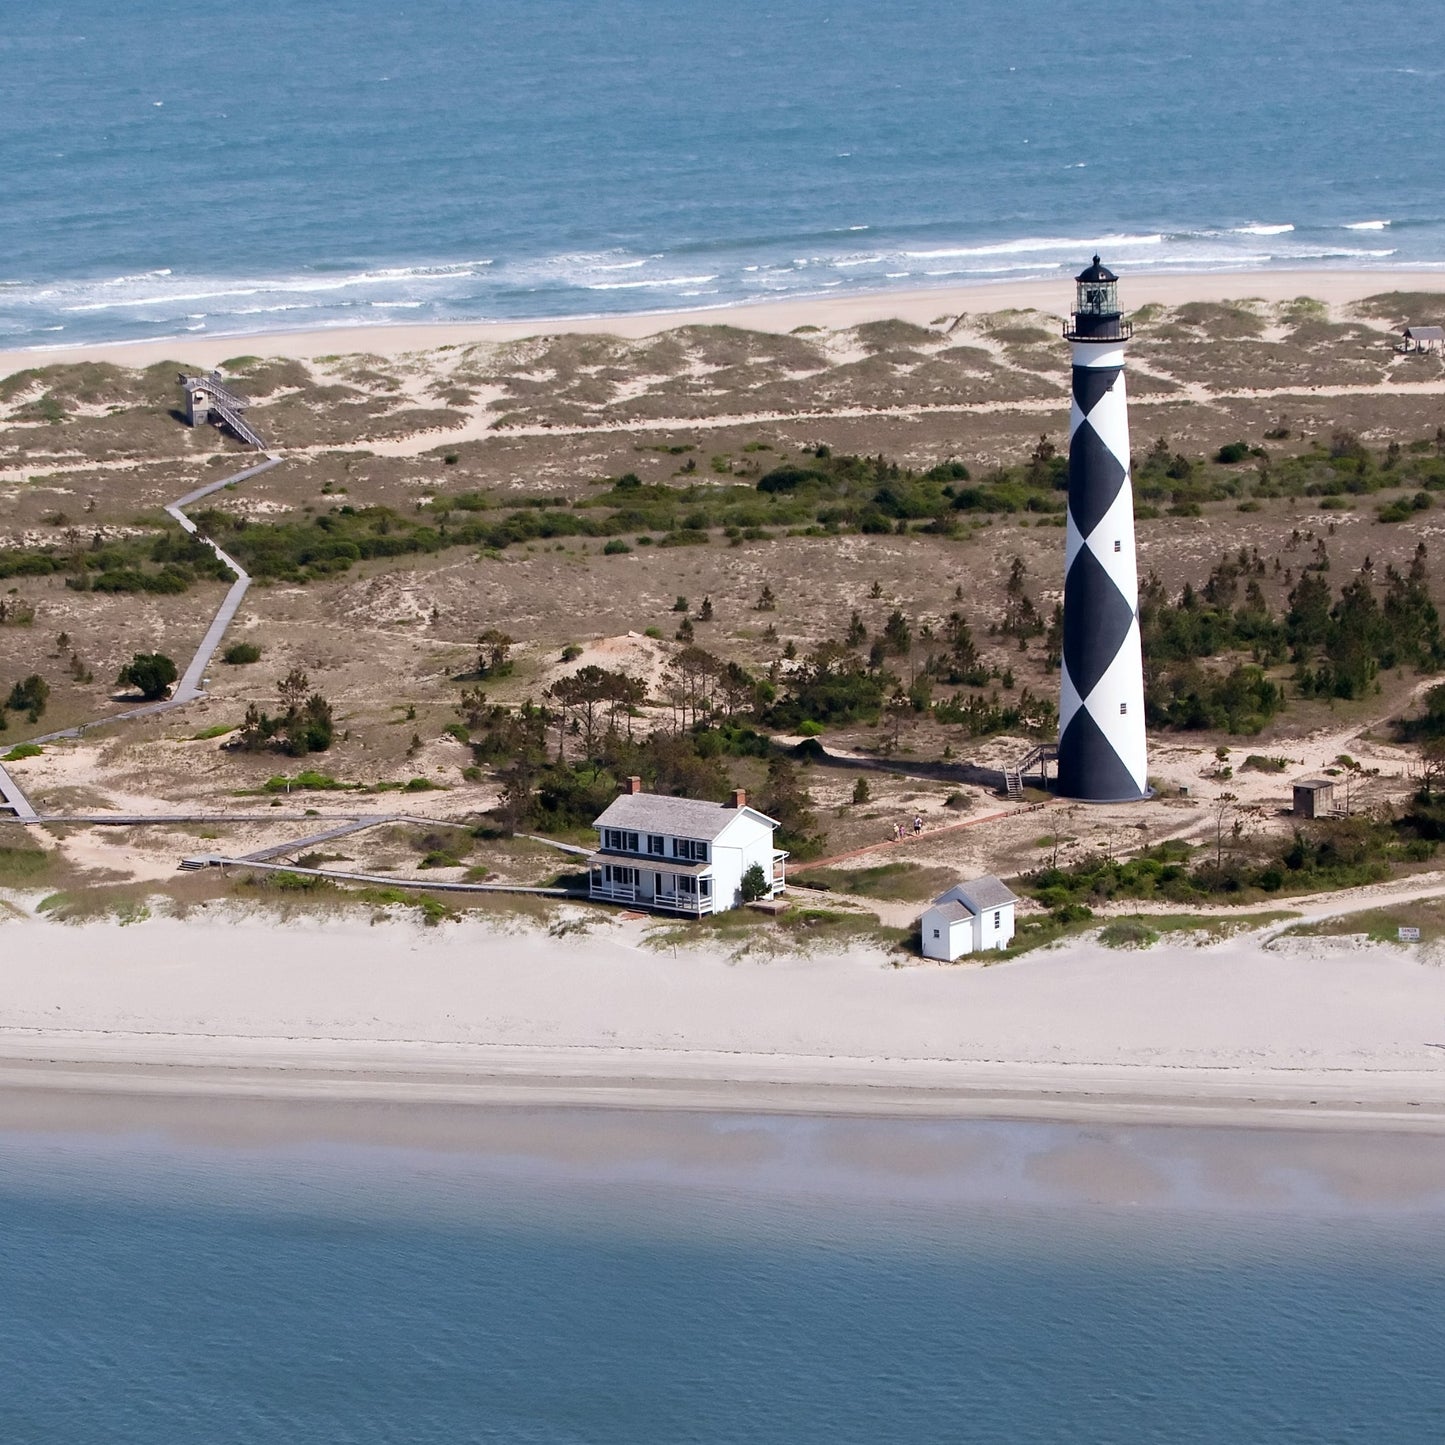 ⛺ Plan a Beach Camping Trip at Cape Lookout